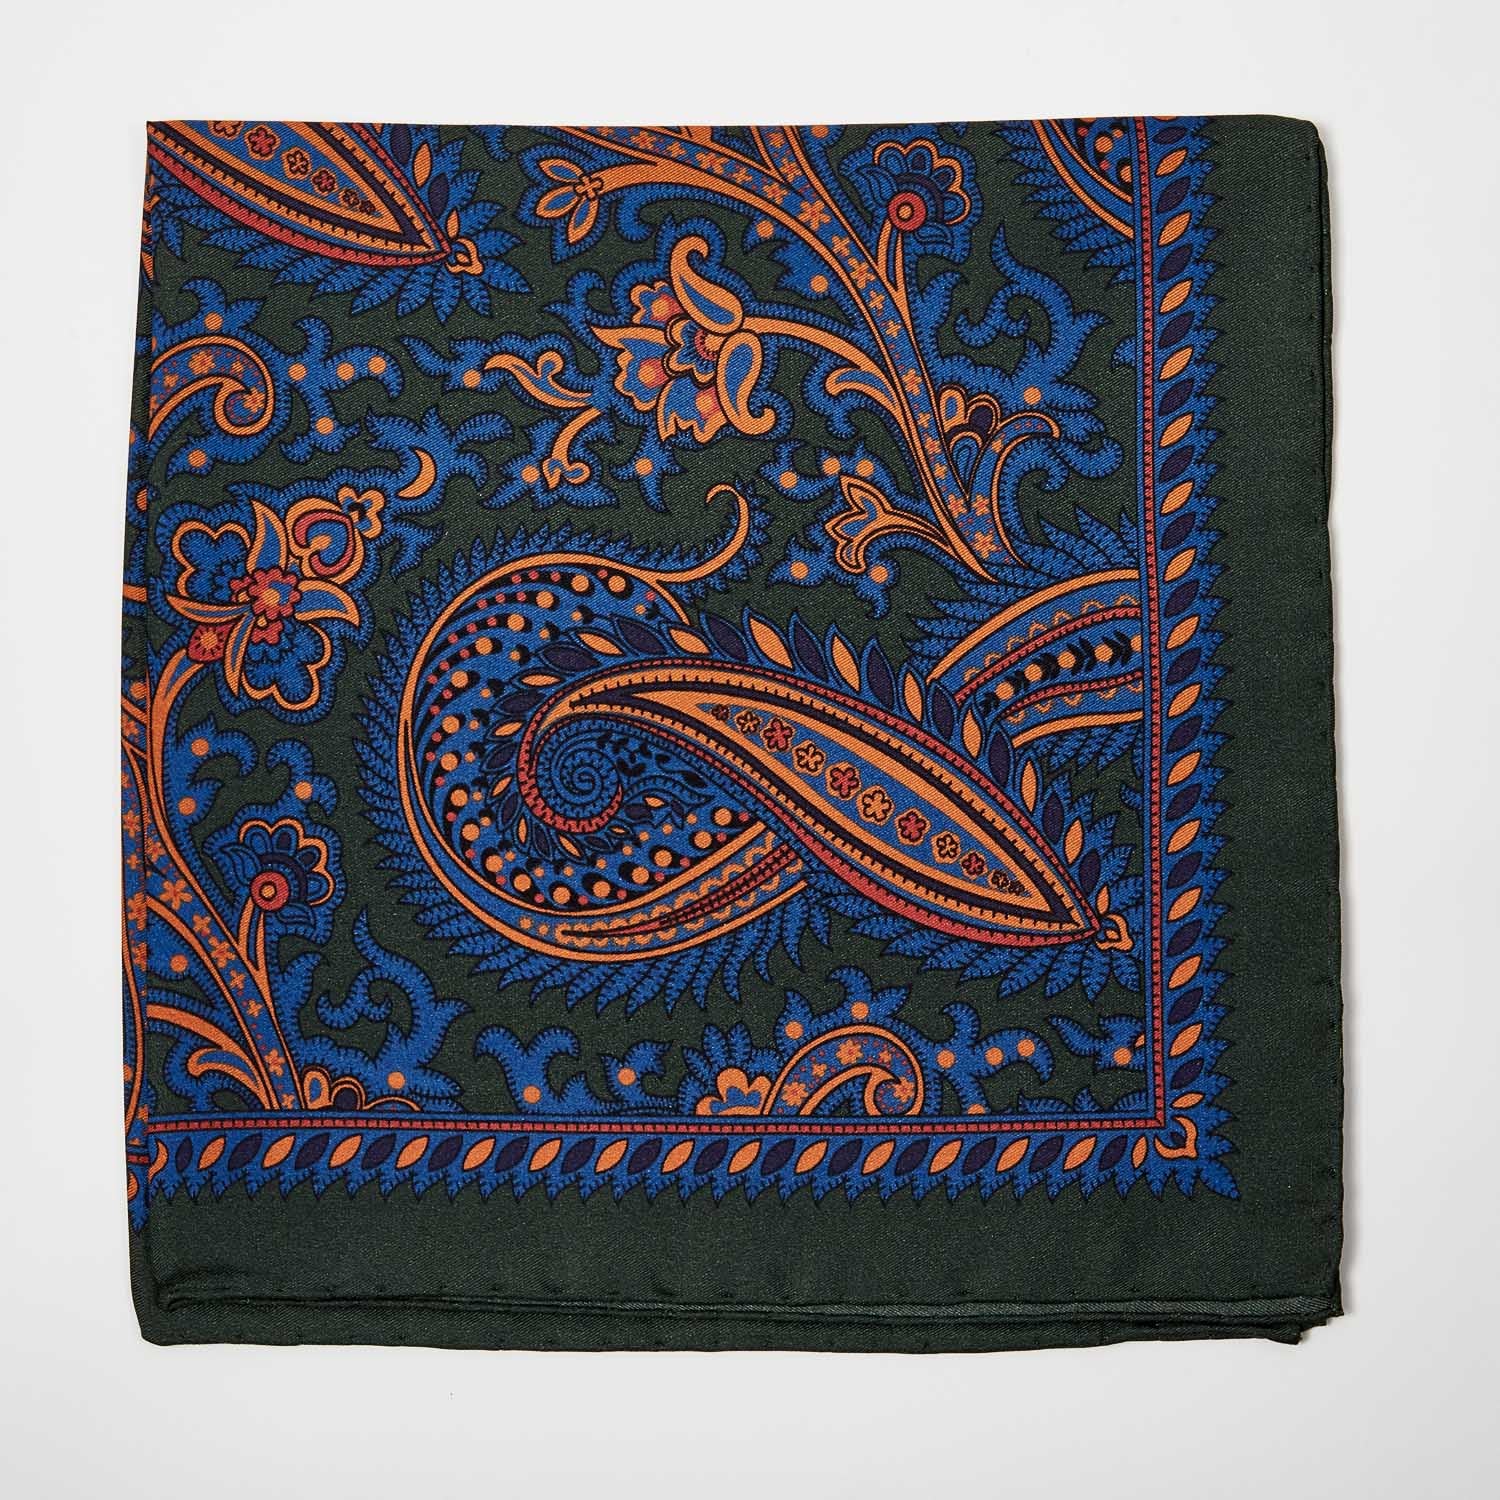 A Sovereign Grade 100% Silk Forest Pocket Square by KirbyAllison.com, with a green and orange paisley pattern, suitable for formal outfits.